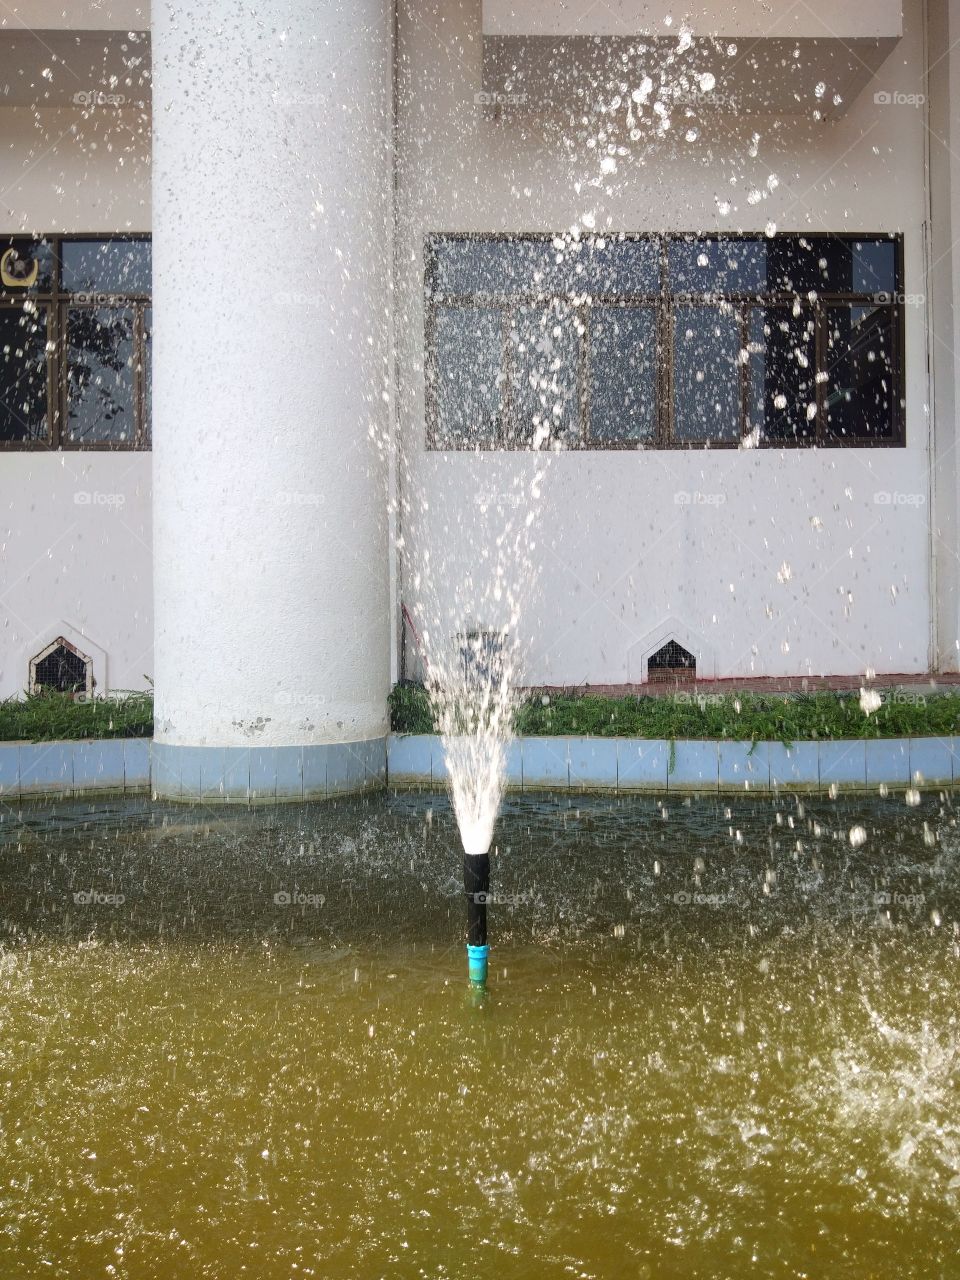 The fountains in the pond in front of the building for decoration.